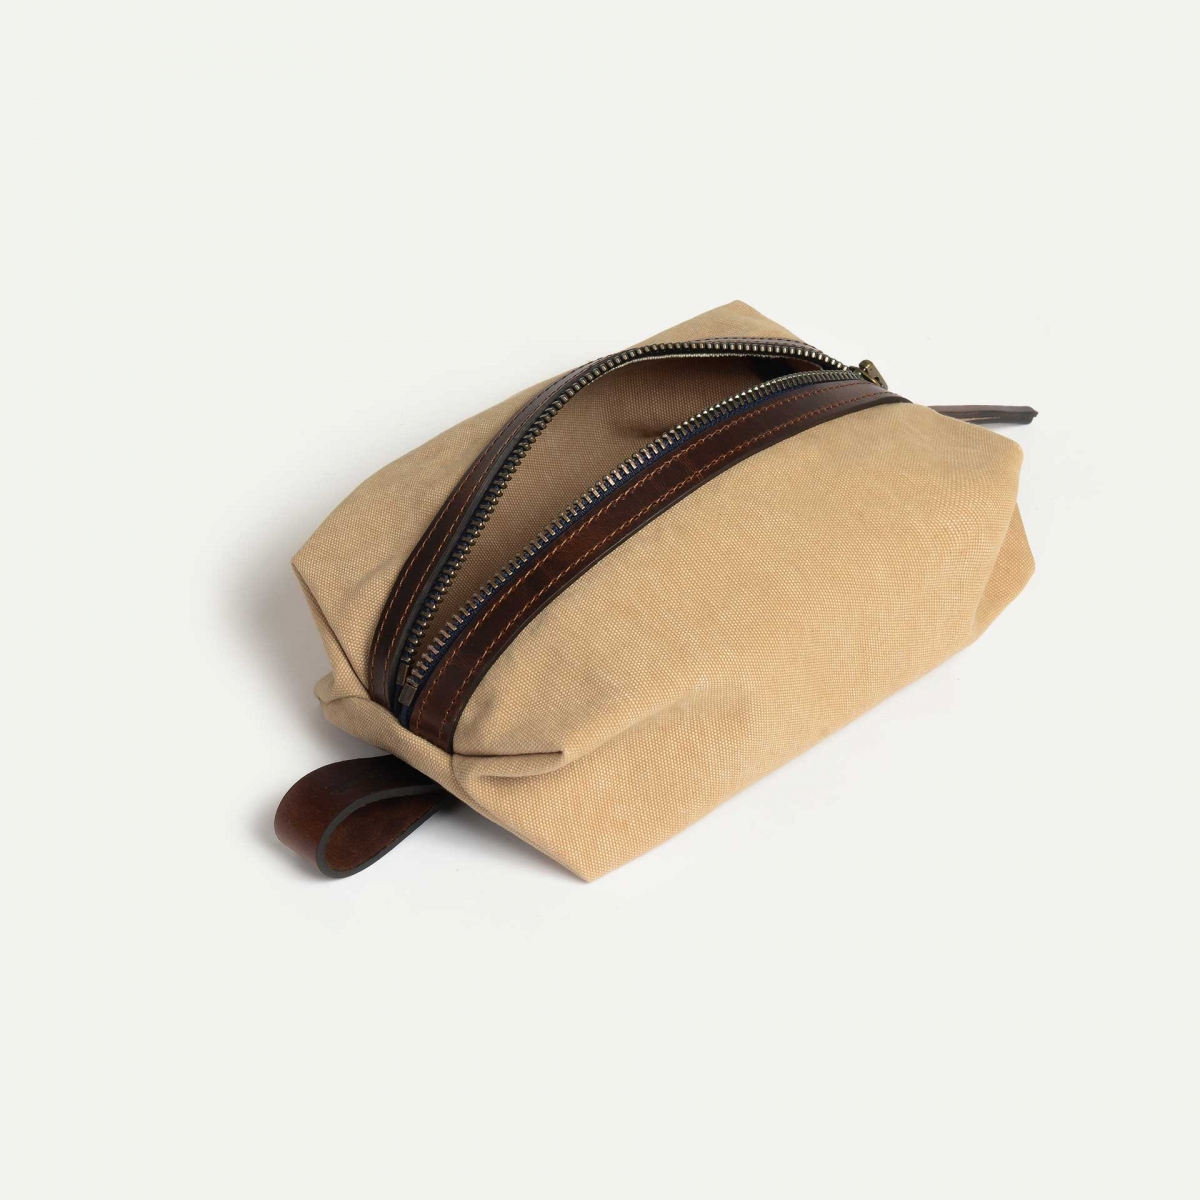 ZAZOU toiletry case - Wheat / Canvas and Leather (image n°3)